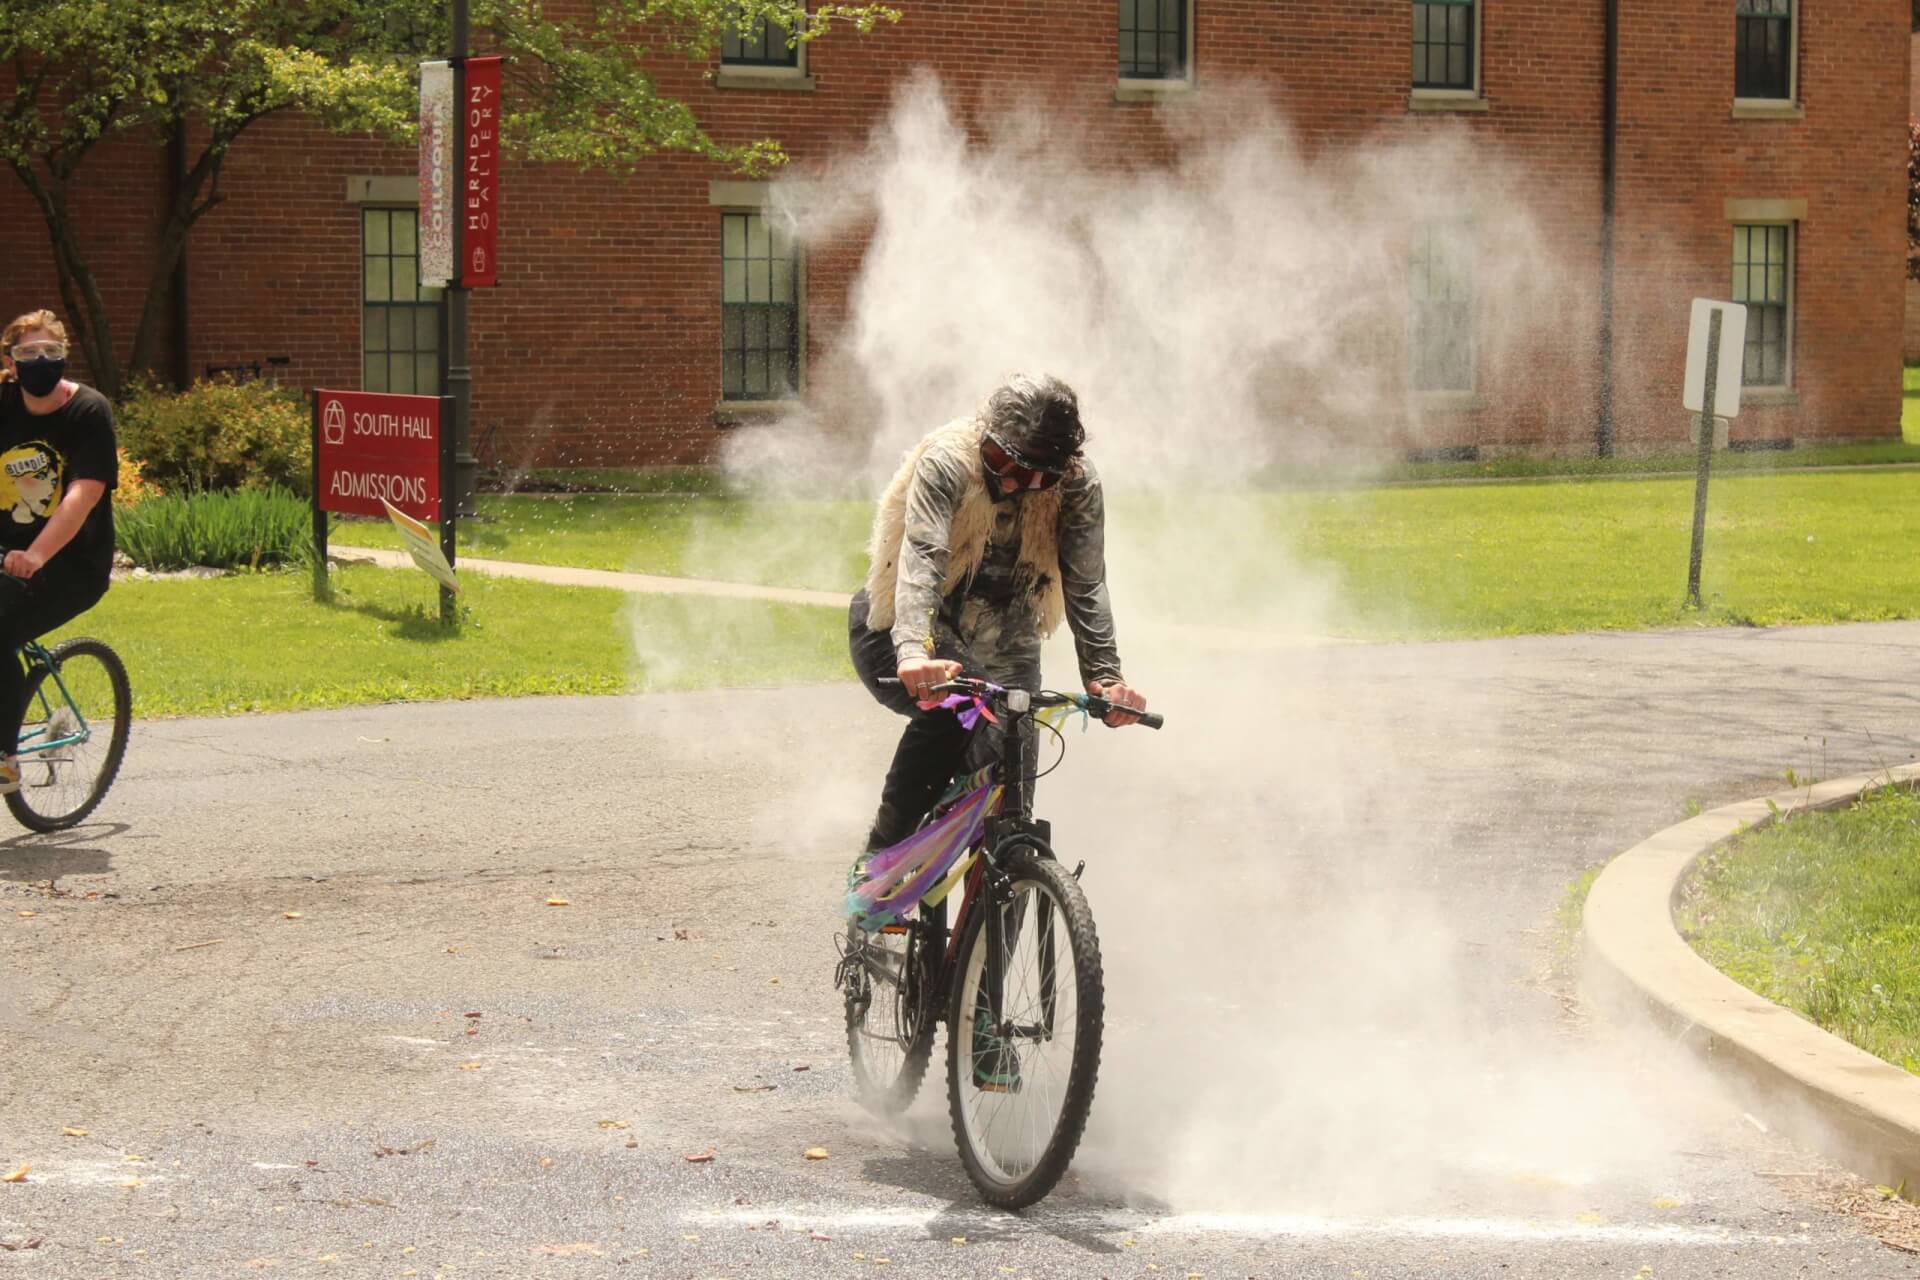 A rider on the Horseshoe looks on as another bike rider moves through a cloud of flour that was thrown at them.